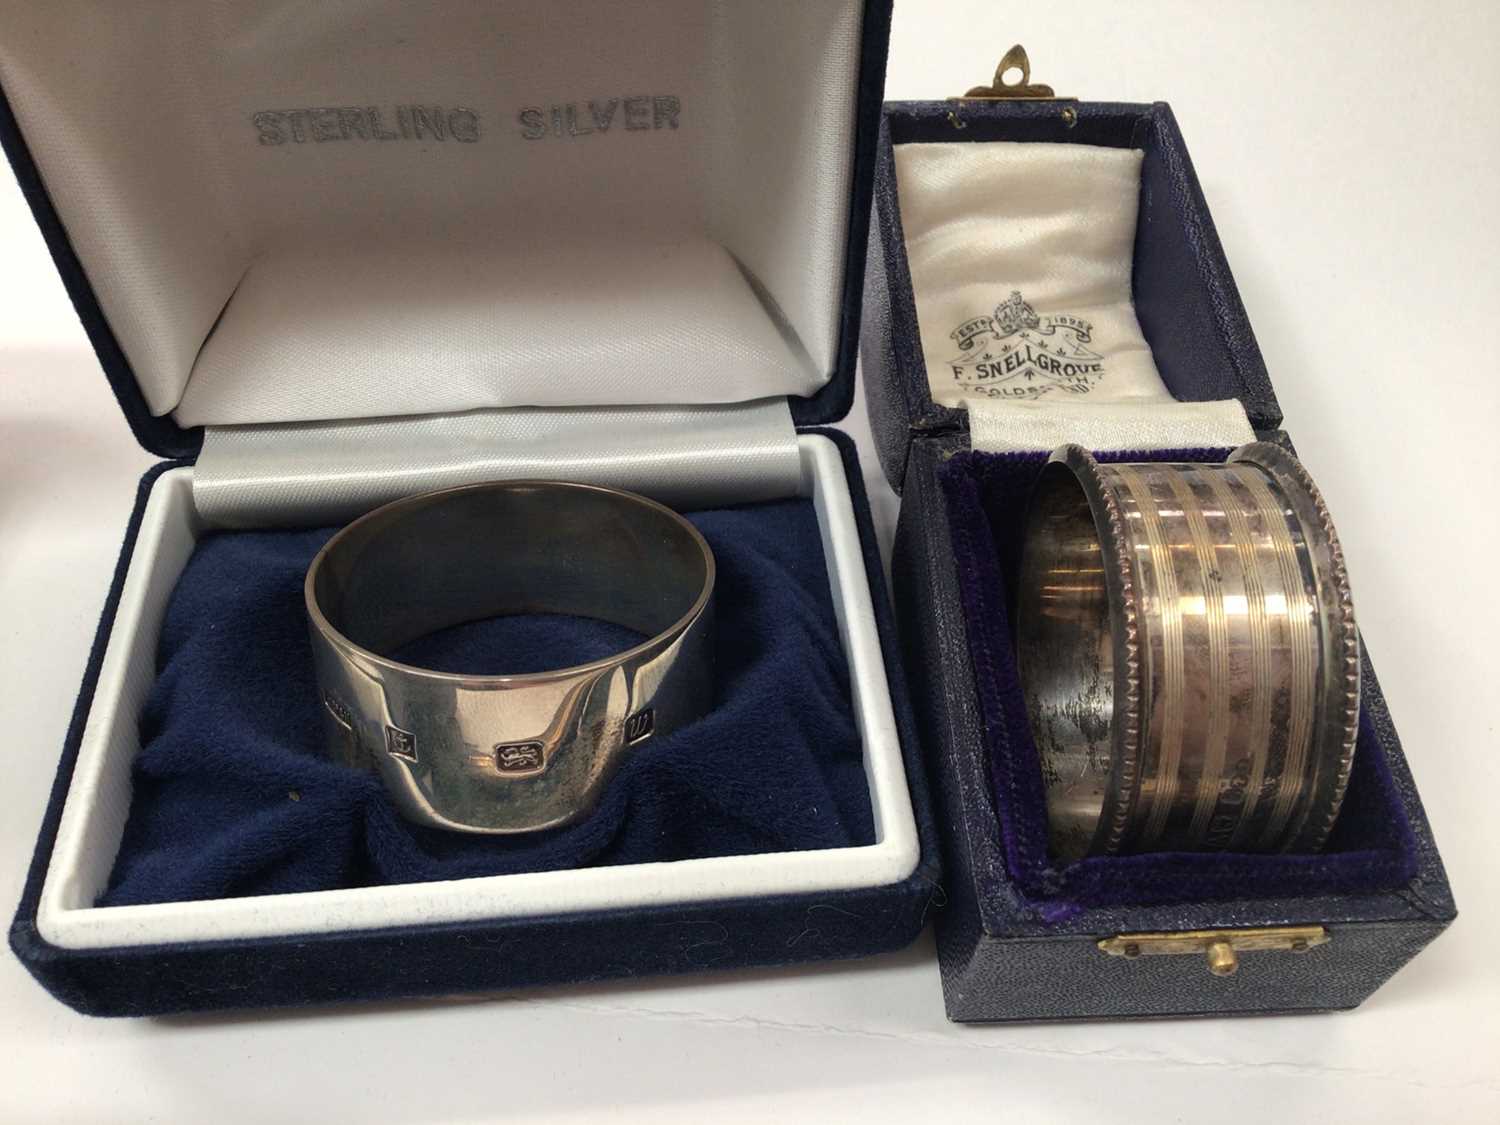 Group of silver to include two napkin rings, two bookmarks, bottle stopper, St. Christopher key ring - Image 2 of 6